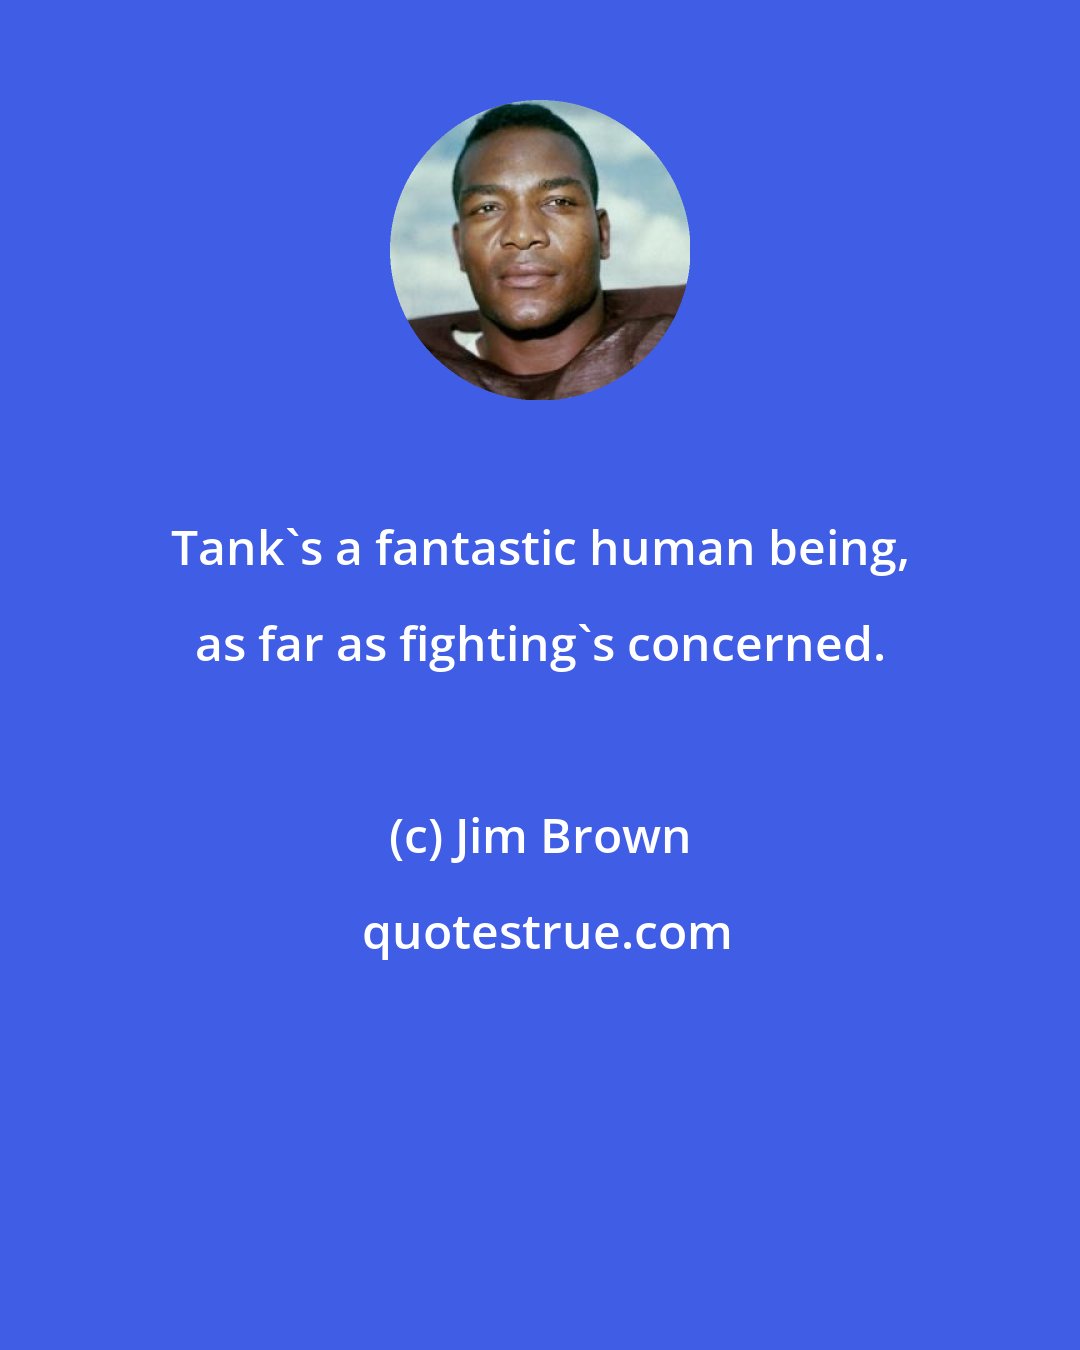 Jim Brown: Tank's a fantastic human being, as far as fighting's concerned.